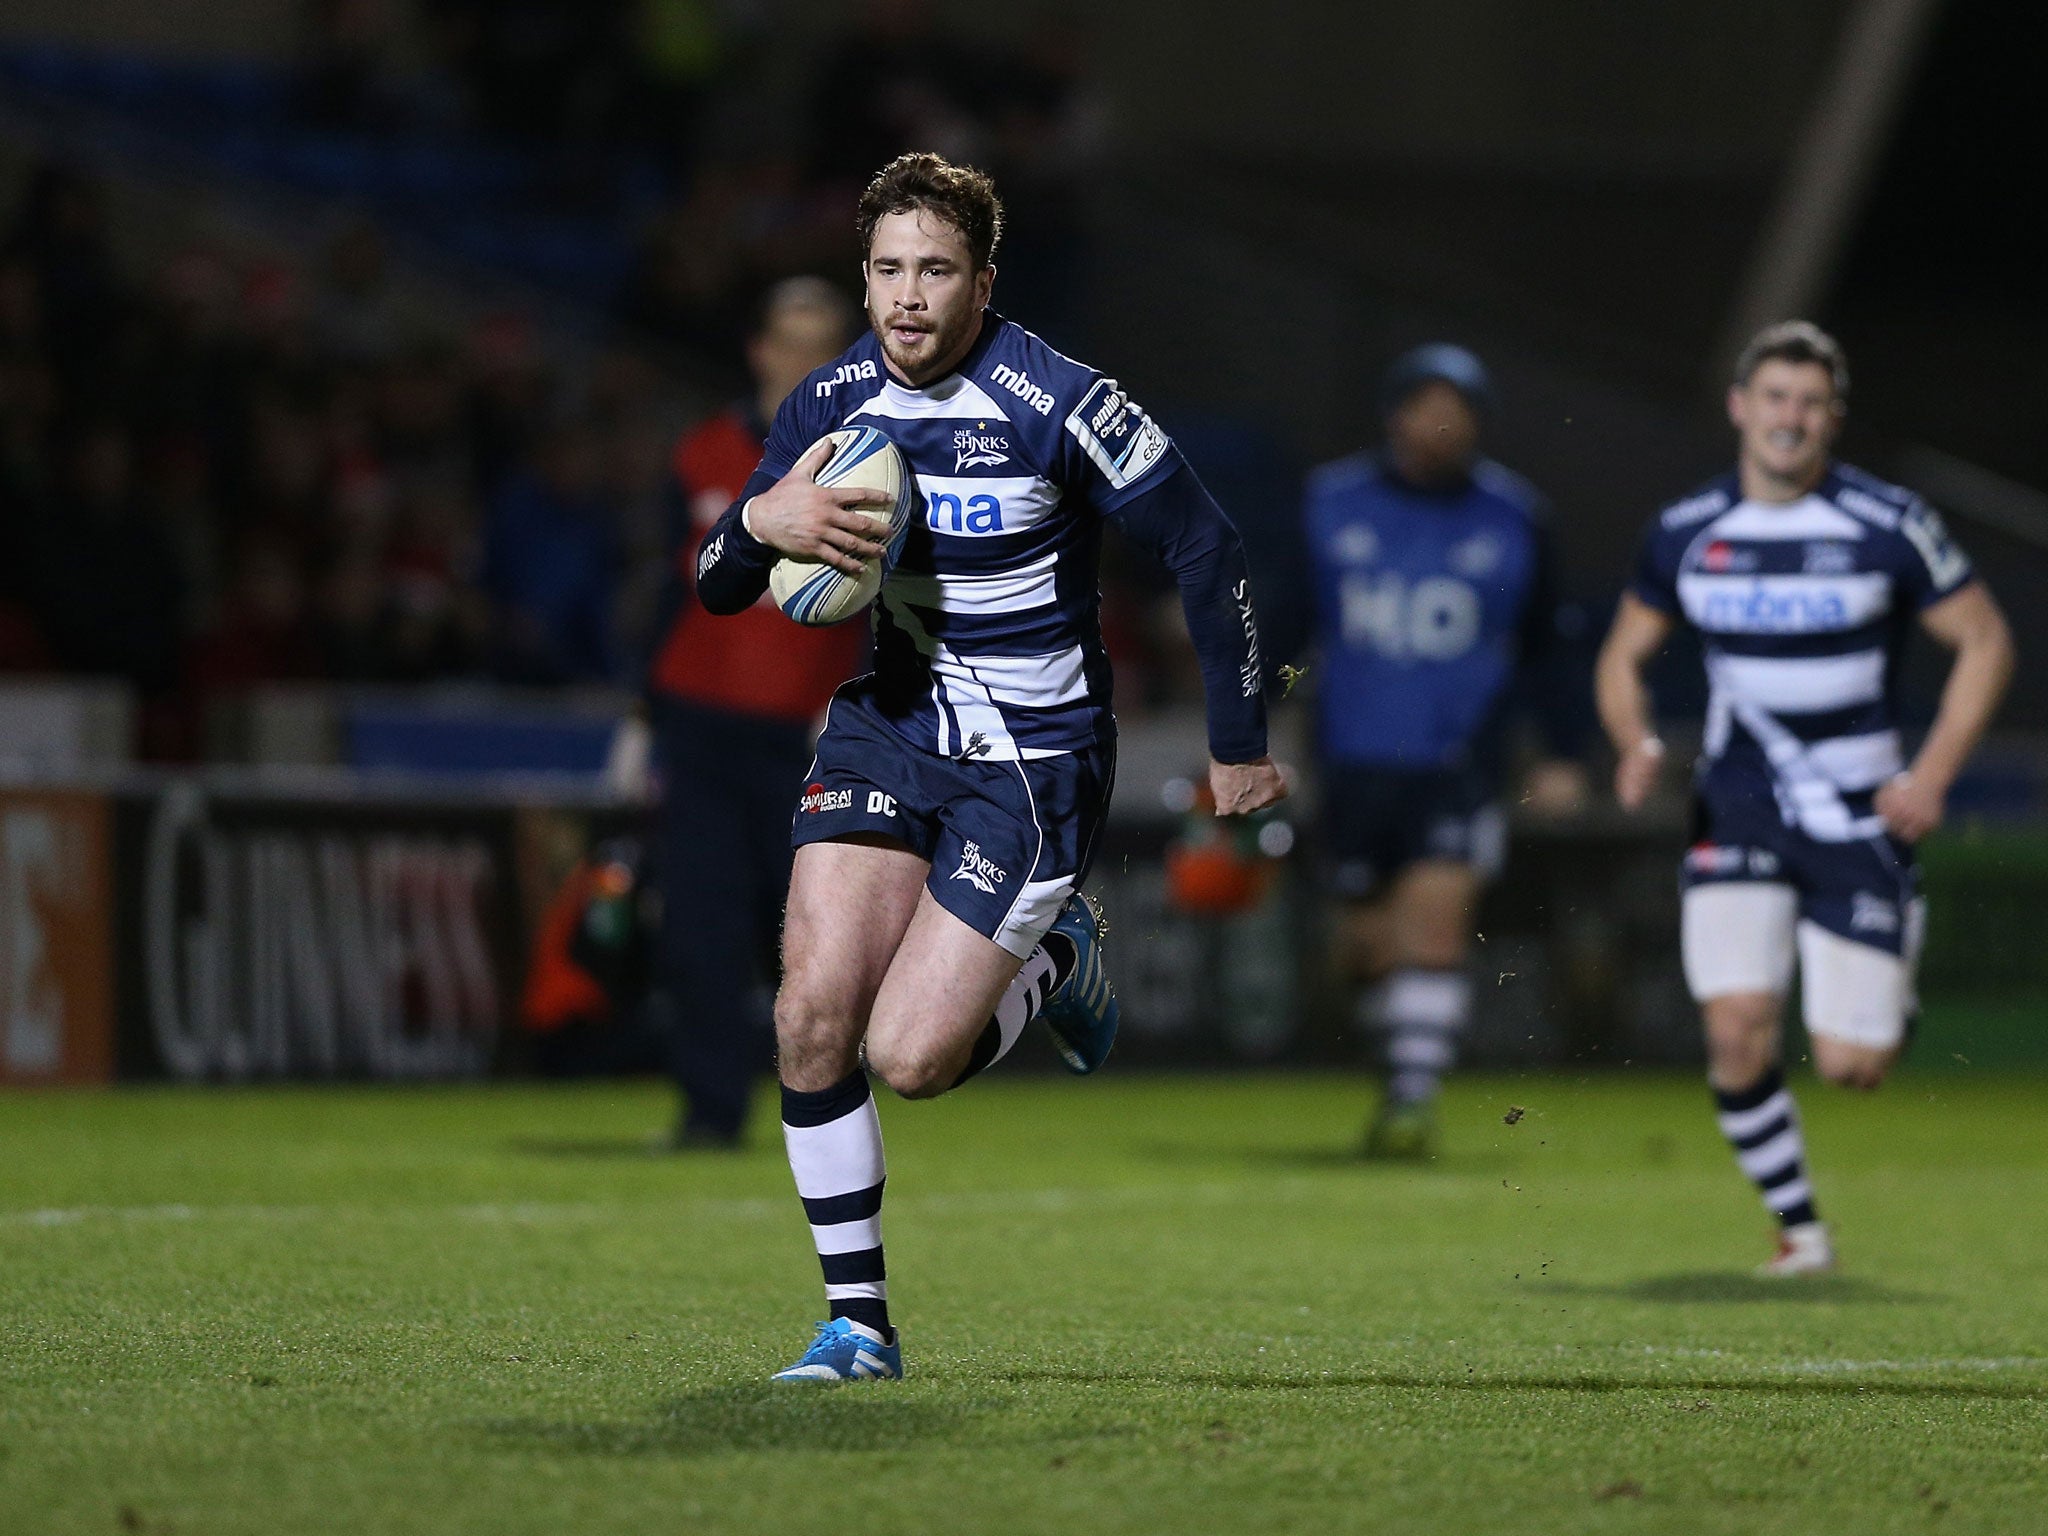 Danny Cipriani on his way to scoring a try in the Amlin Challenge Cup match against Oyonnax